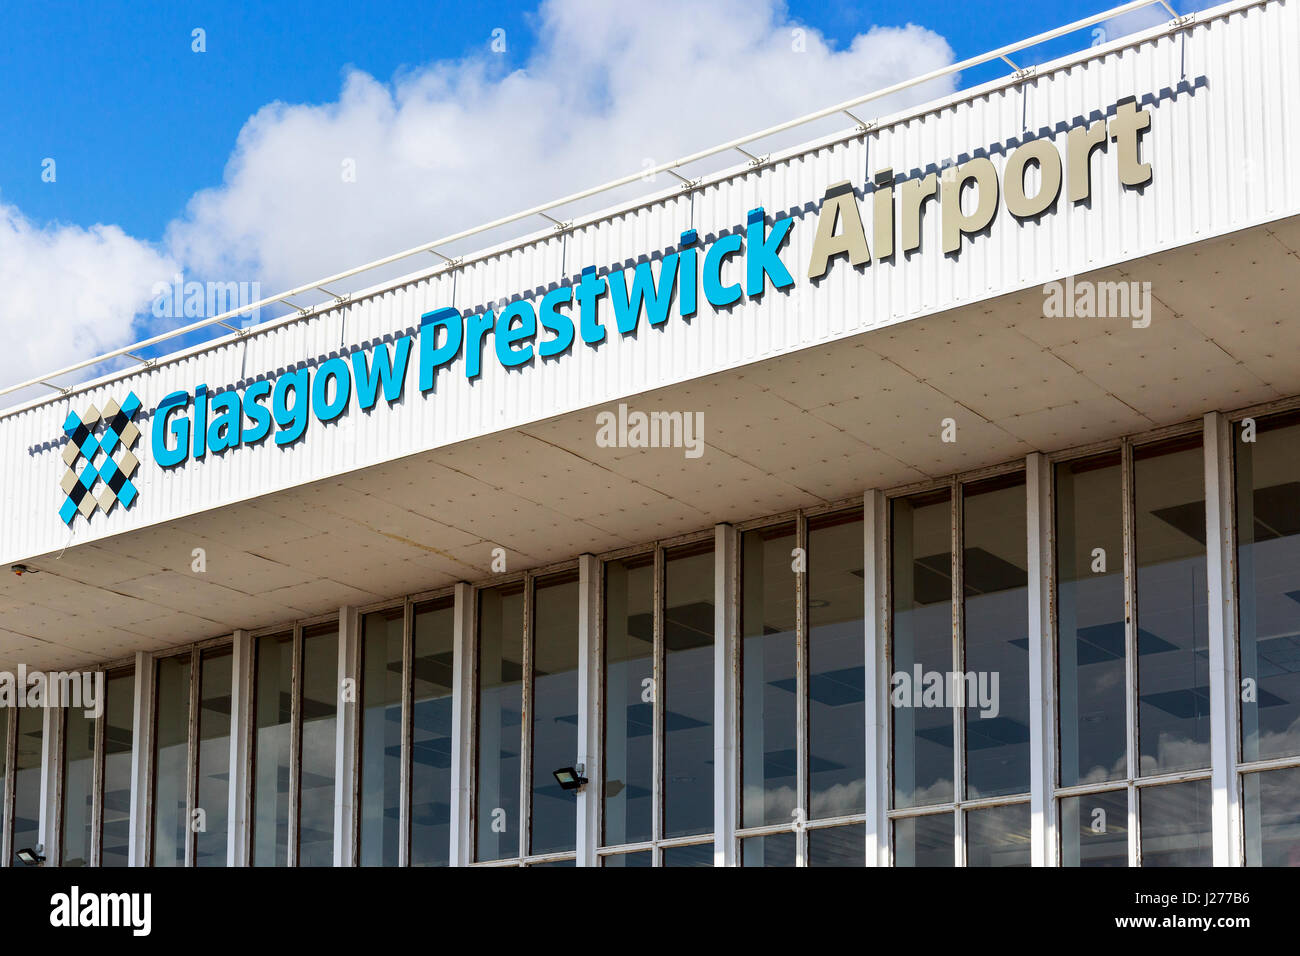 Entrance sign at Glasgow Prestwick Airport, Prestwick, Ayrshire, Scotland, UK. The airport was bought by the Scottish Government and has now been nati Stock Photo